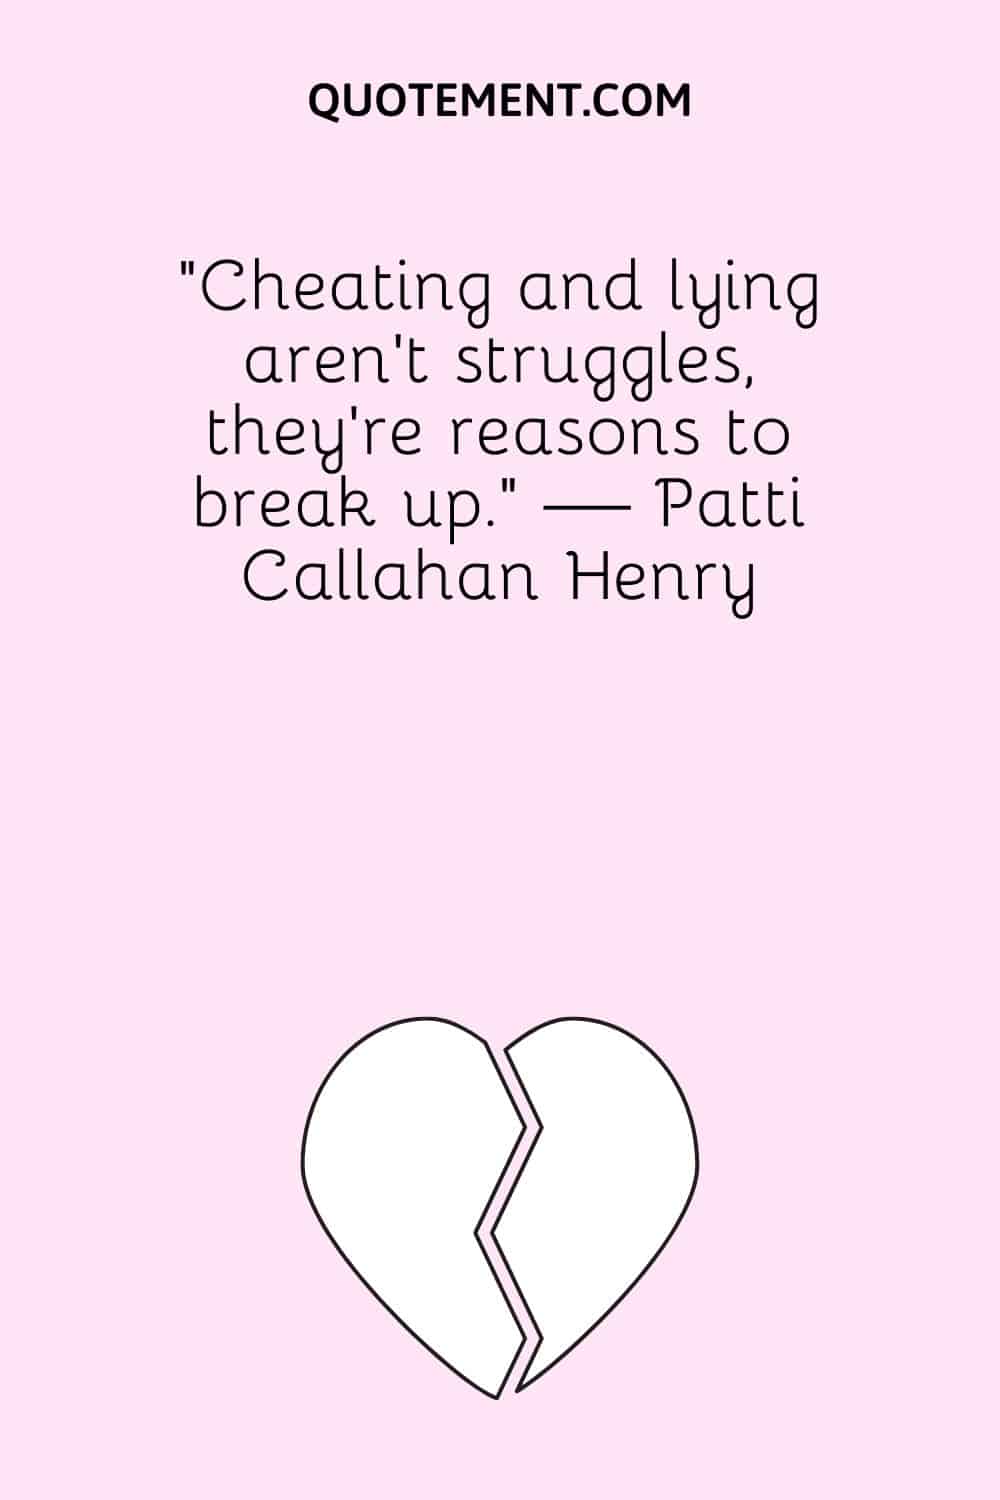 Cheating and lying aren't struggles, they're reasons to break up. — Patti Callahan Henry